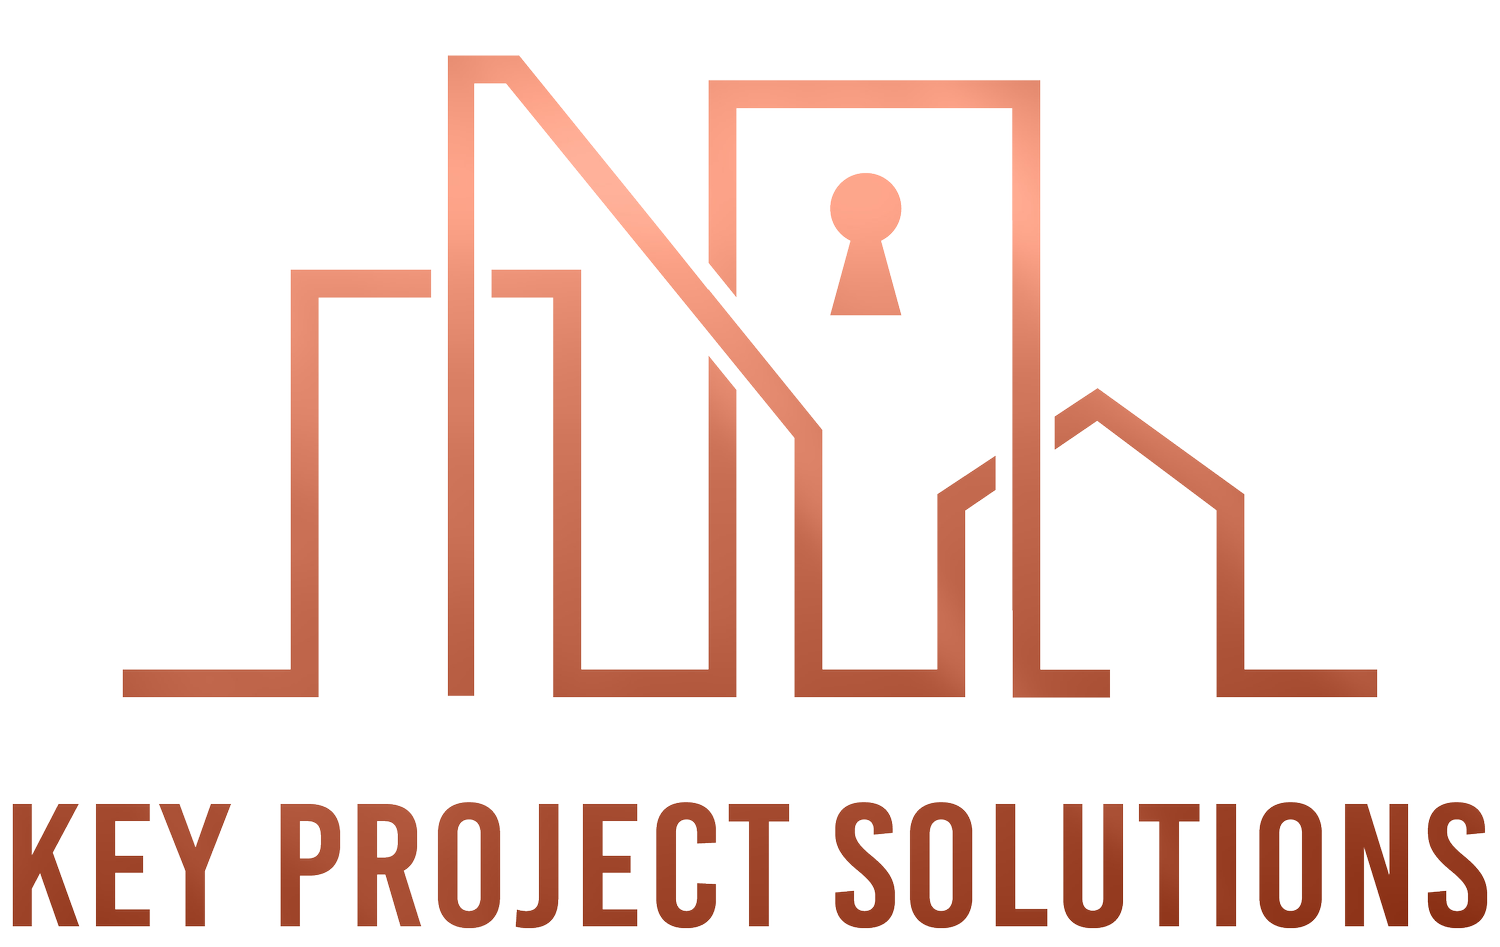 KEY PROJECT SOLUTIONS